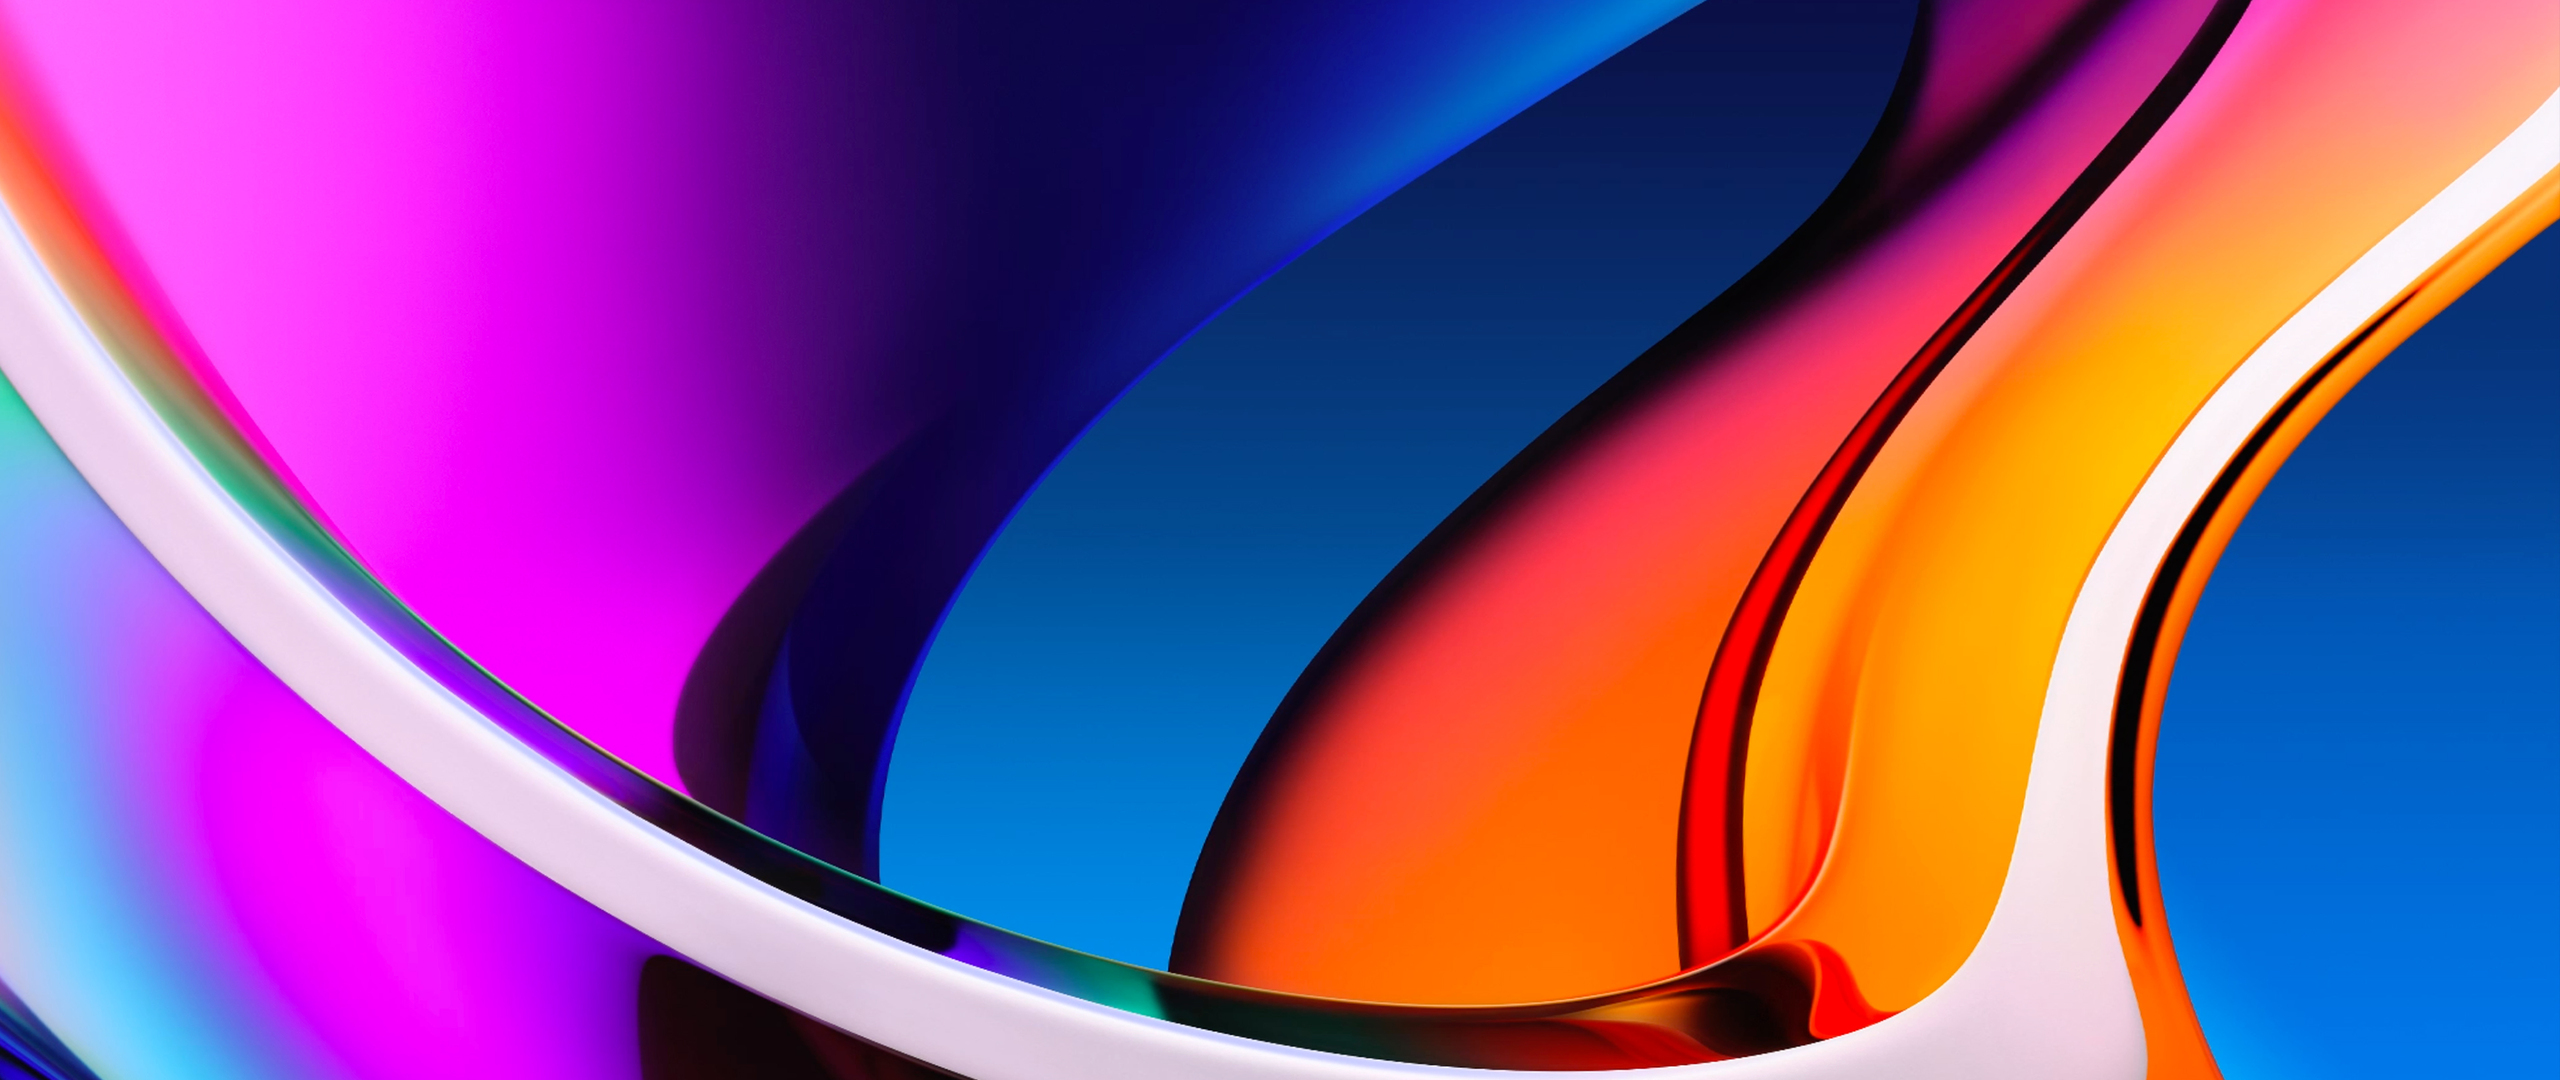 2560x1080 Abstract Colorful Glass Bend Shapes 4k Wallpaper,2560x1080 ...